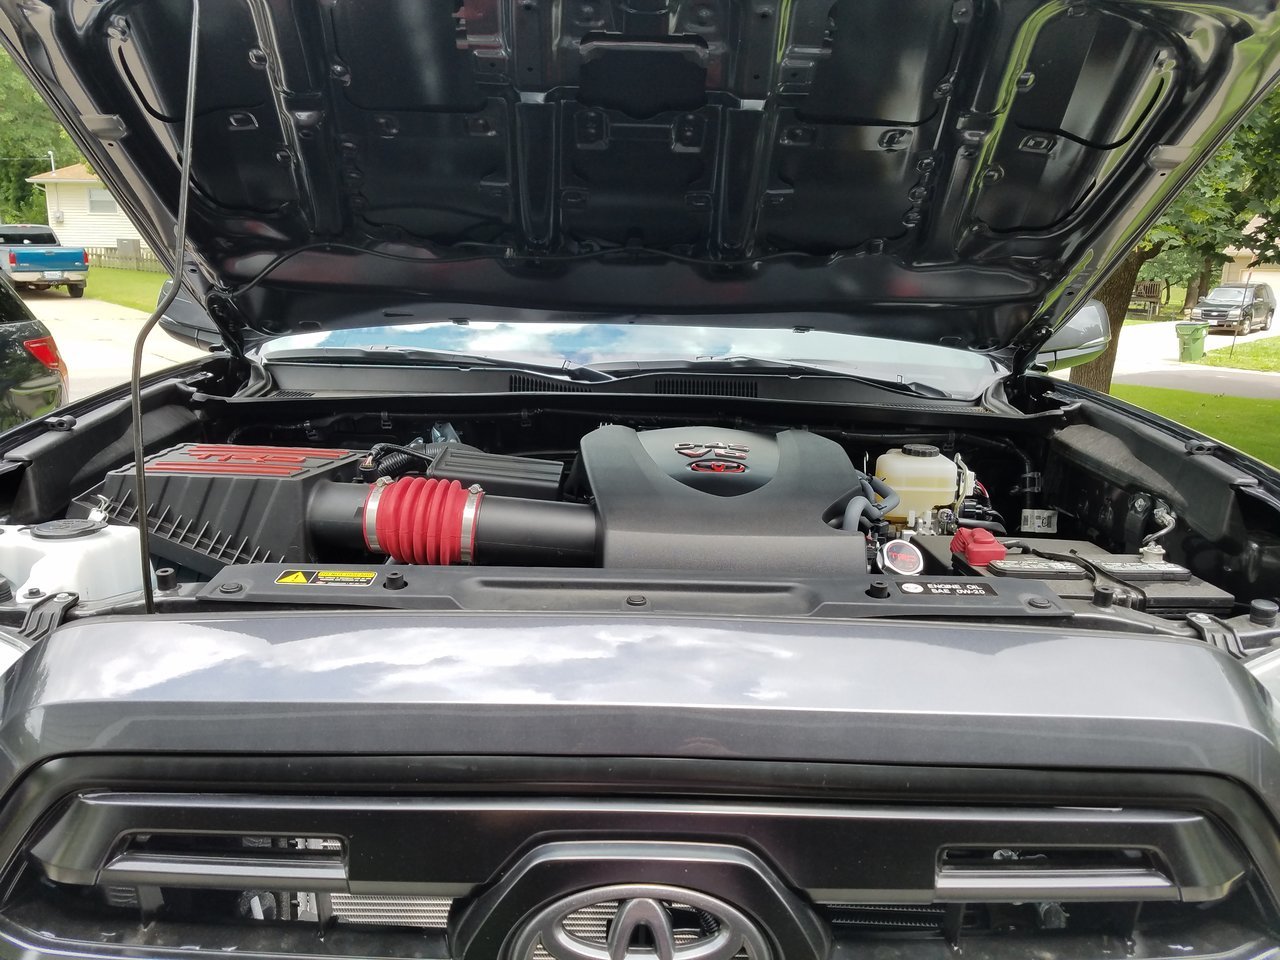 TRD Cold Air Intake rrentp Red Engine Cover Decales and TRD Oil Cap full-view.jpg